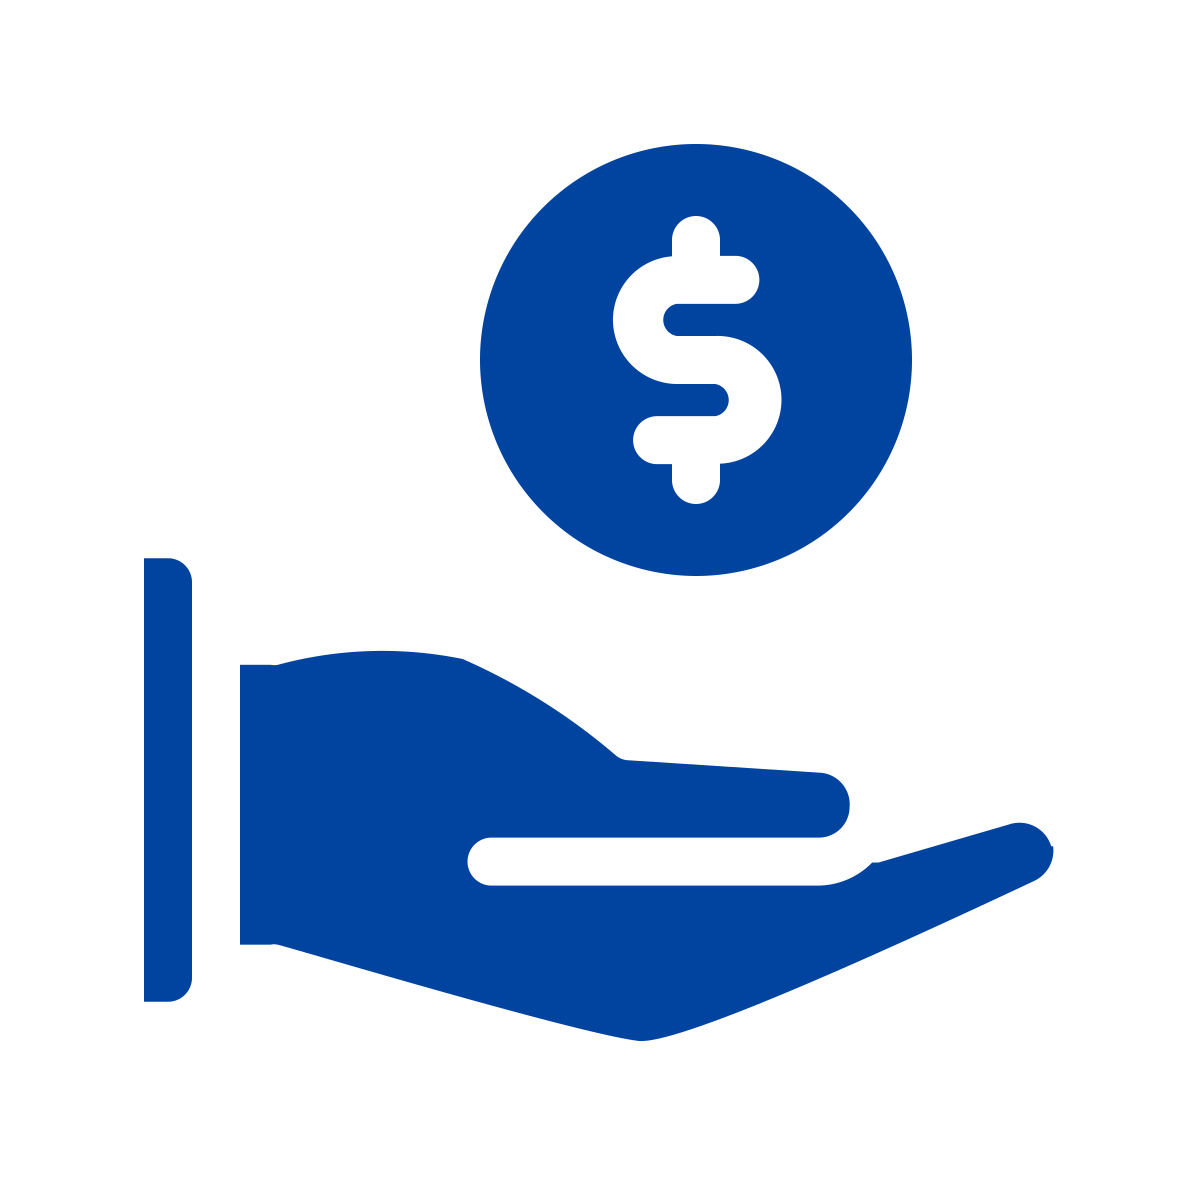 Blue icon shows a hand under a dollar sign.